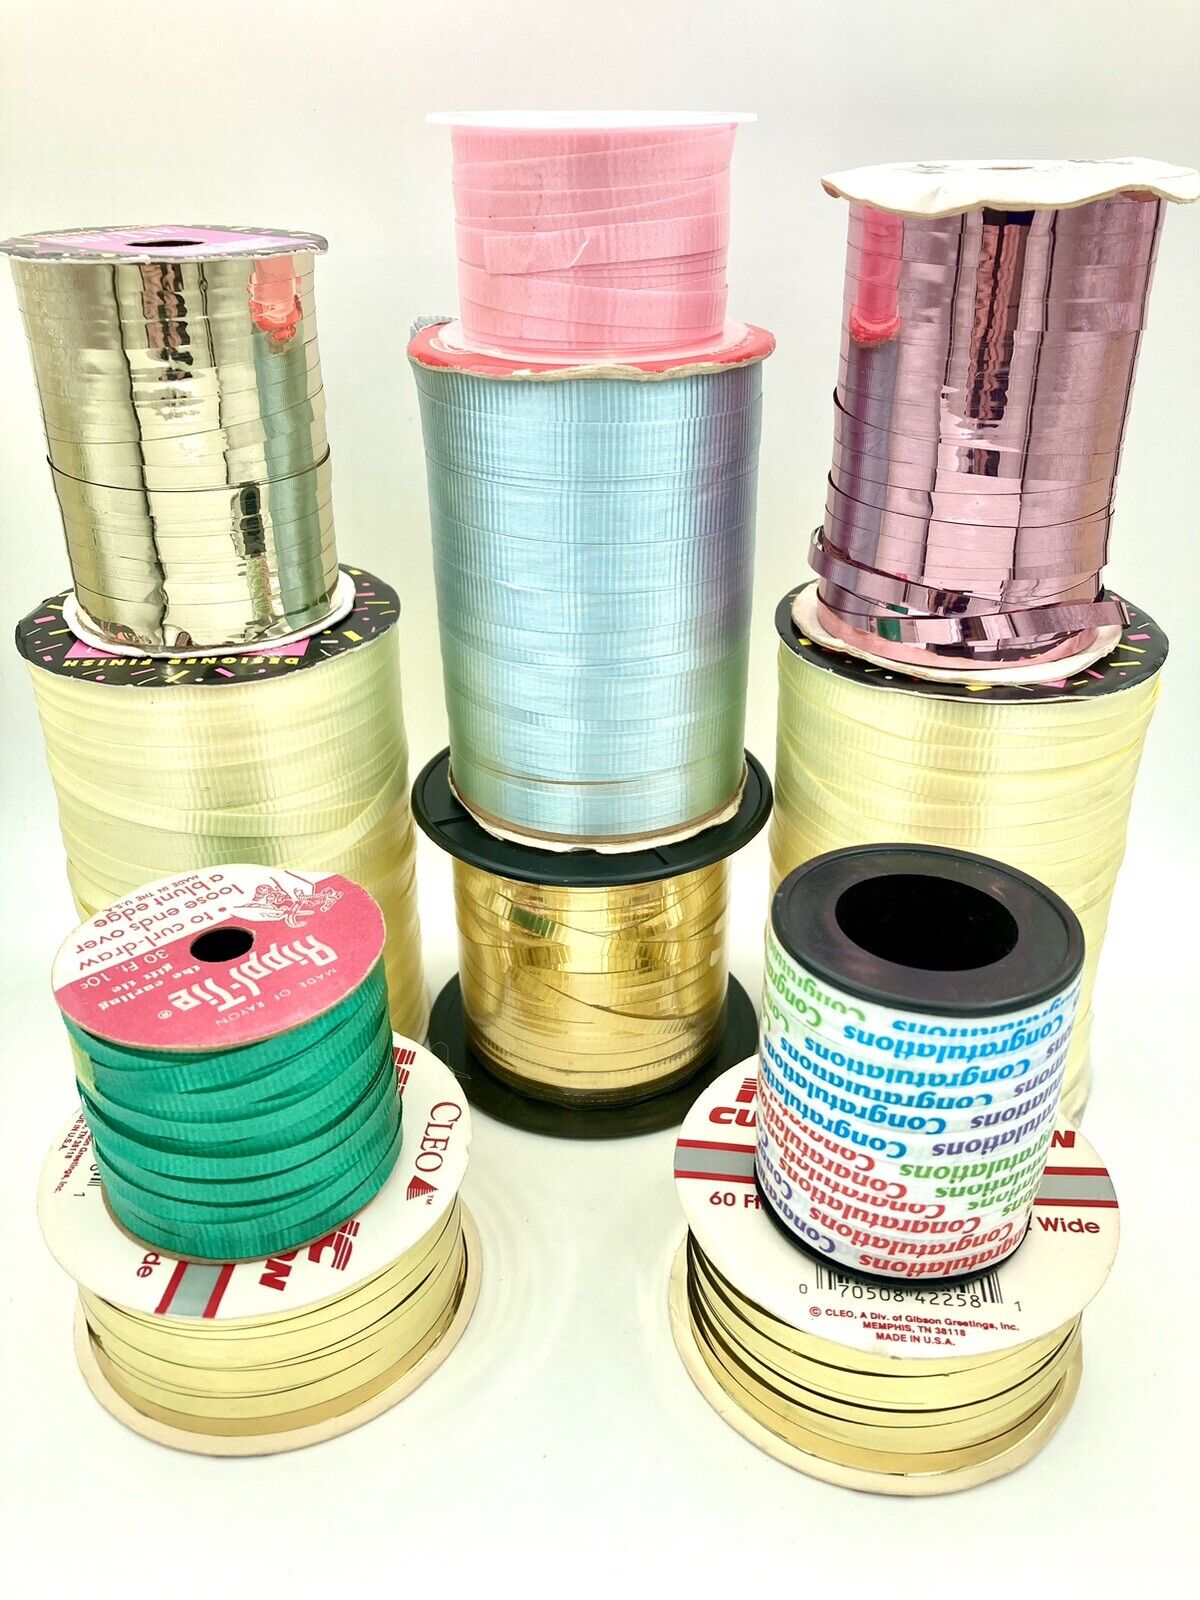 BIG lot Of Curling Ribbon - Party - 1000’s Of Ft - 11 Spools Many Unopened